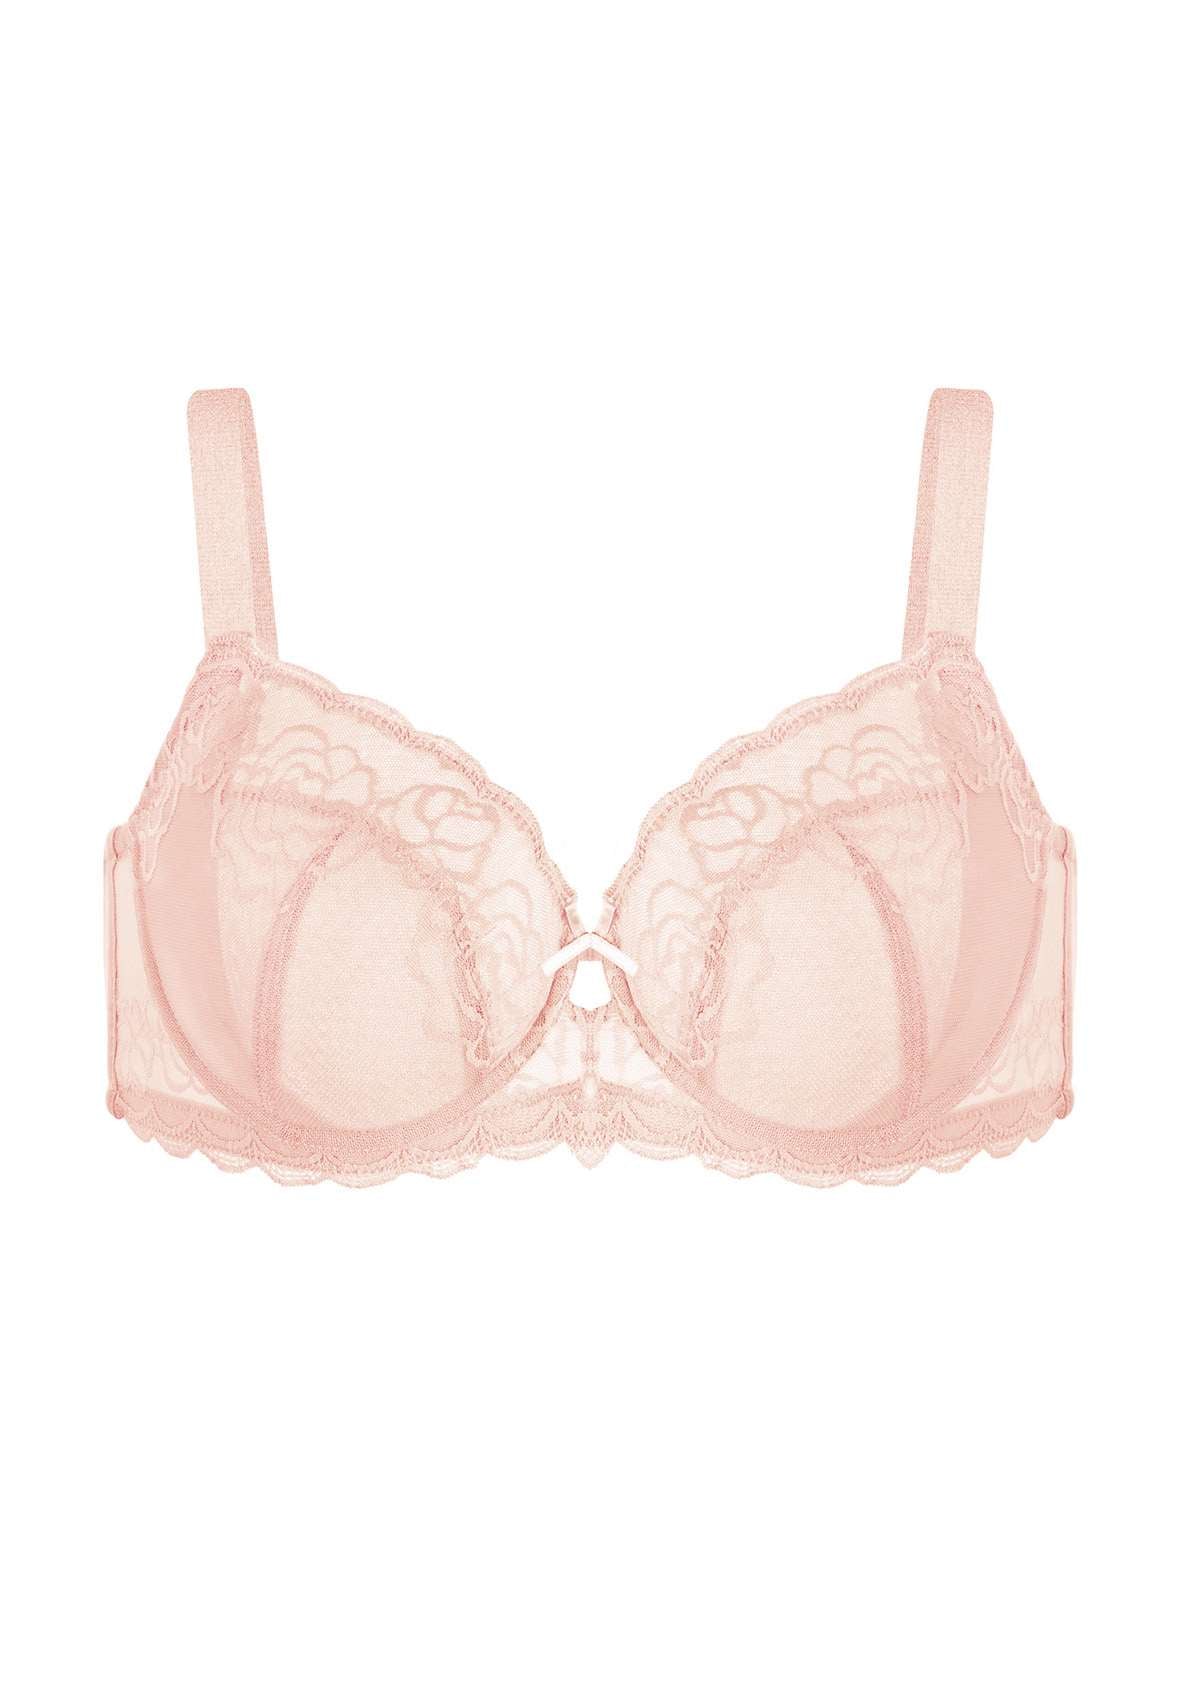 HSIA Rosa Bonica Sheer Lace Mesh Unlined Thin Comfy Woman Bra - Pink / 38 / D